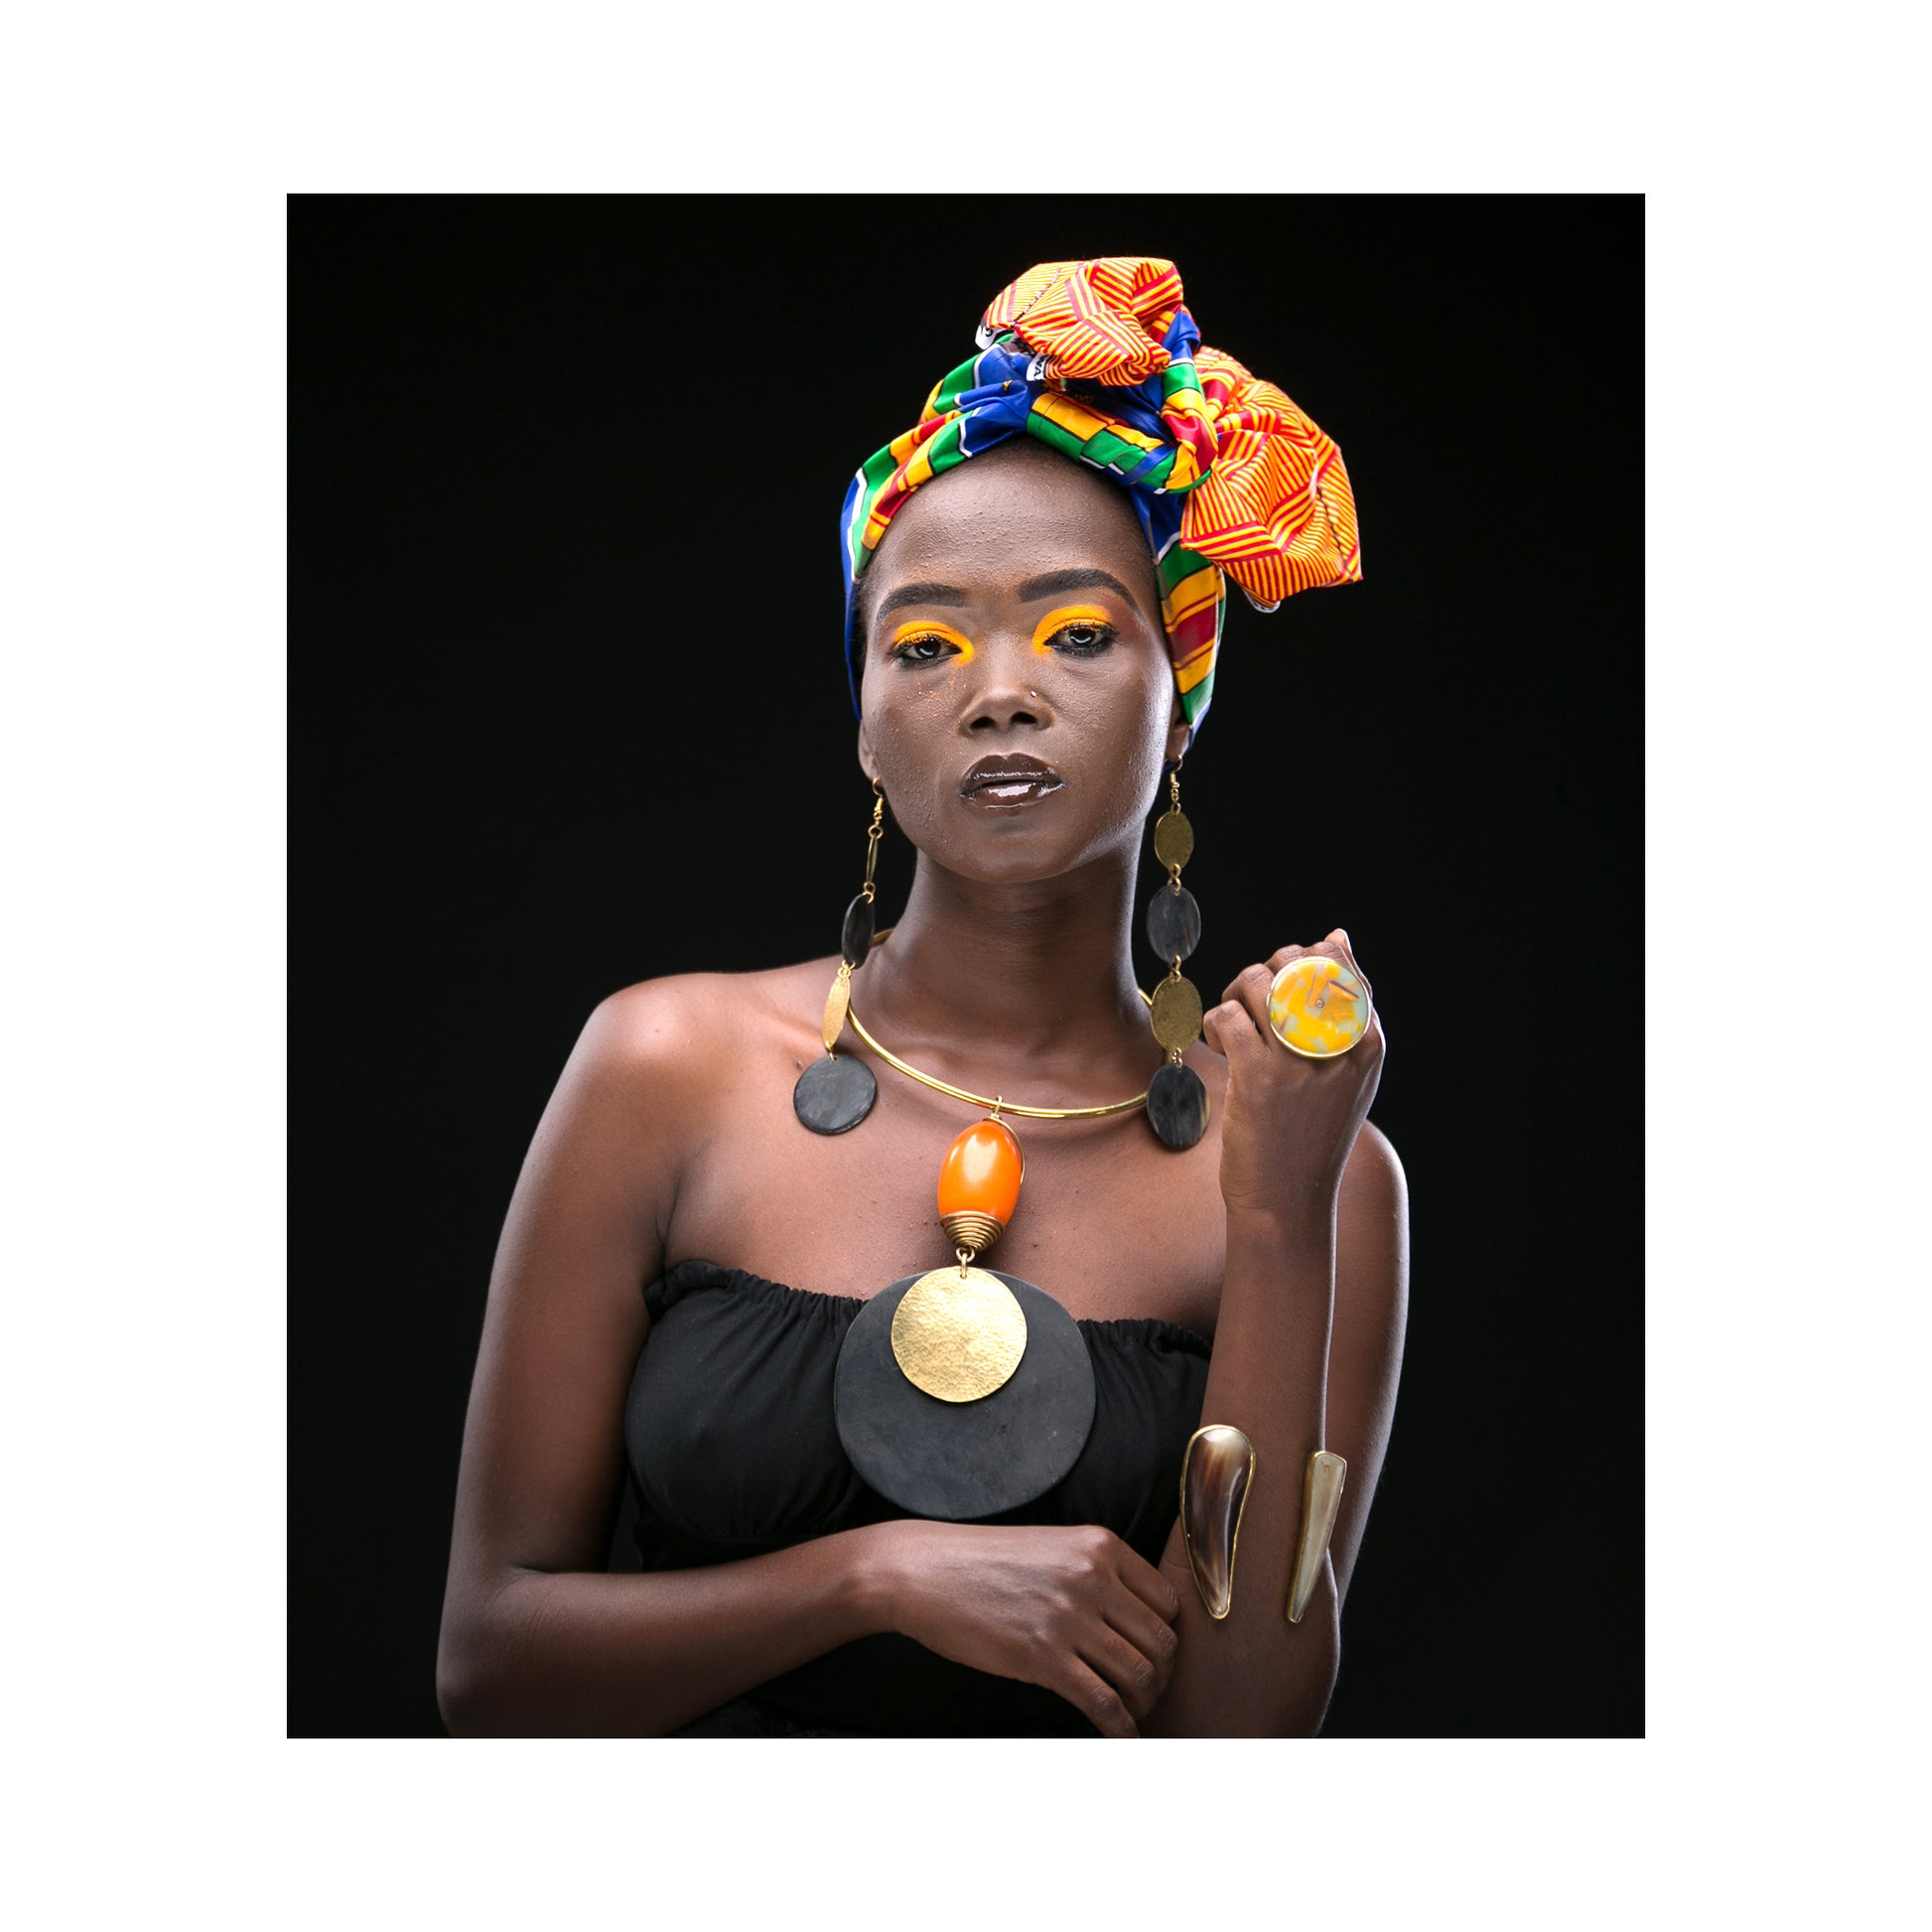 Classic African Bangle - Authentic African handicrafts | Clothing, bags, painting, toys & more - CULTURE HUB by Muthoni Unchained